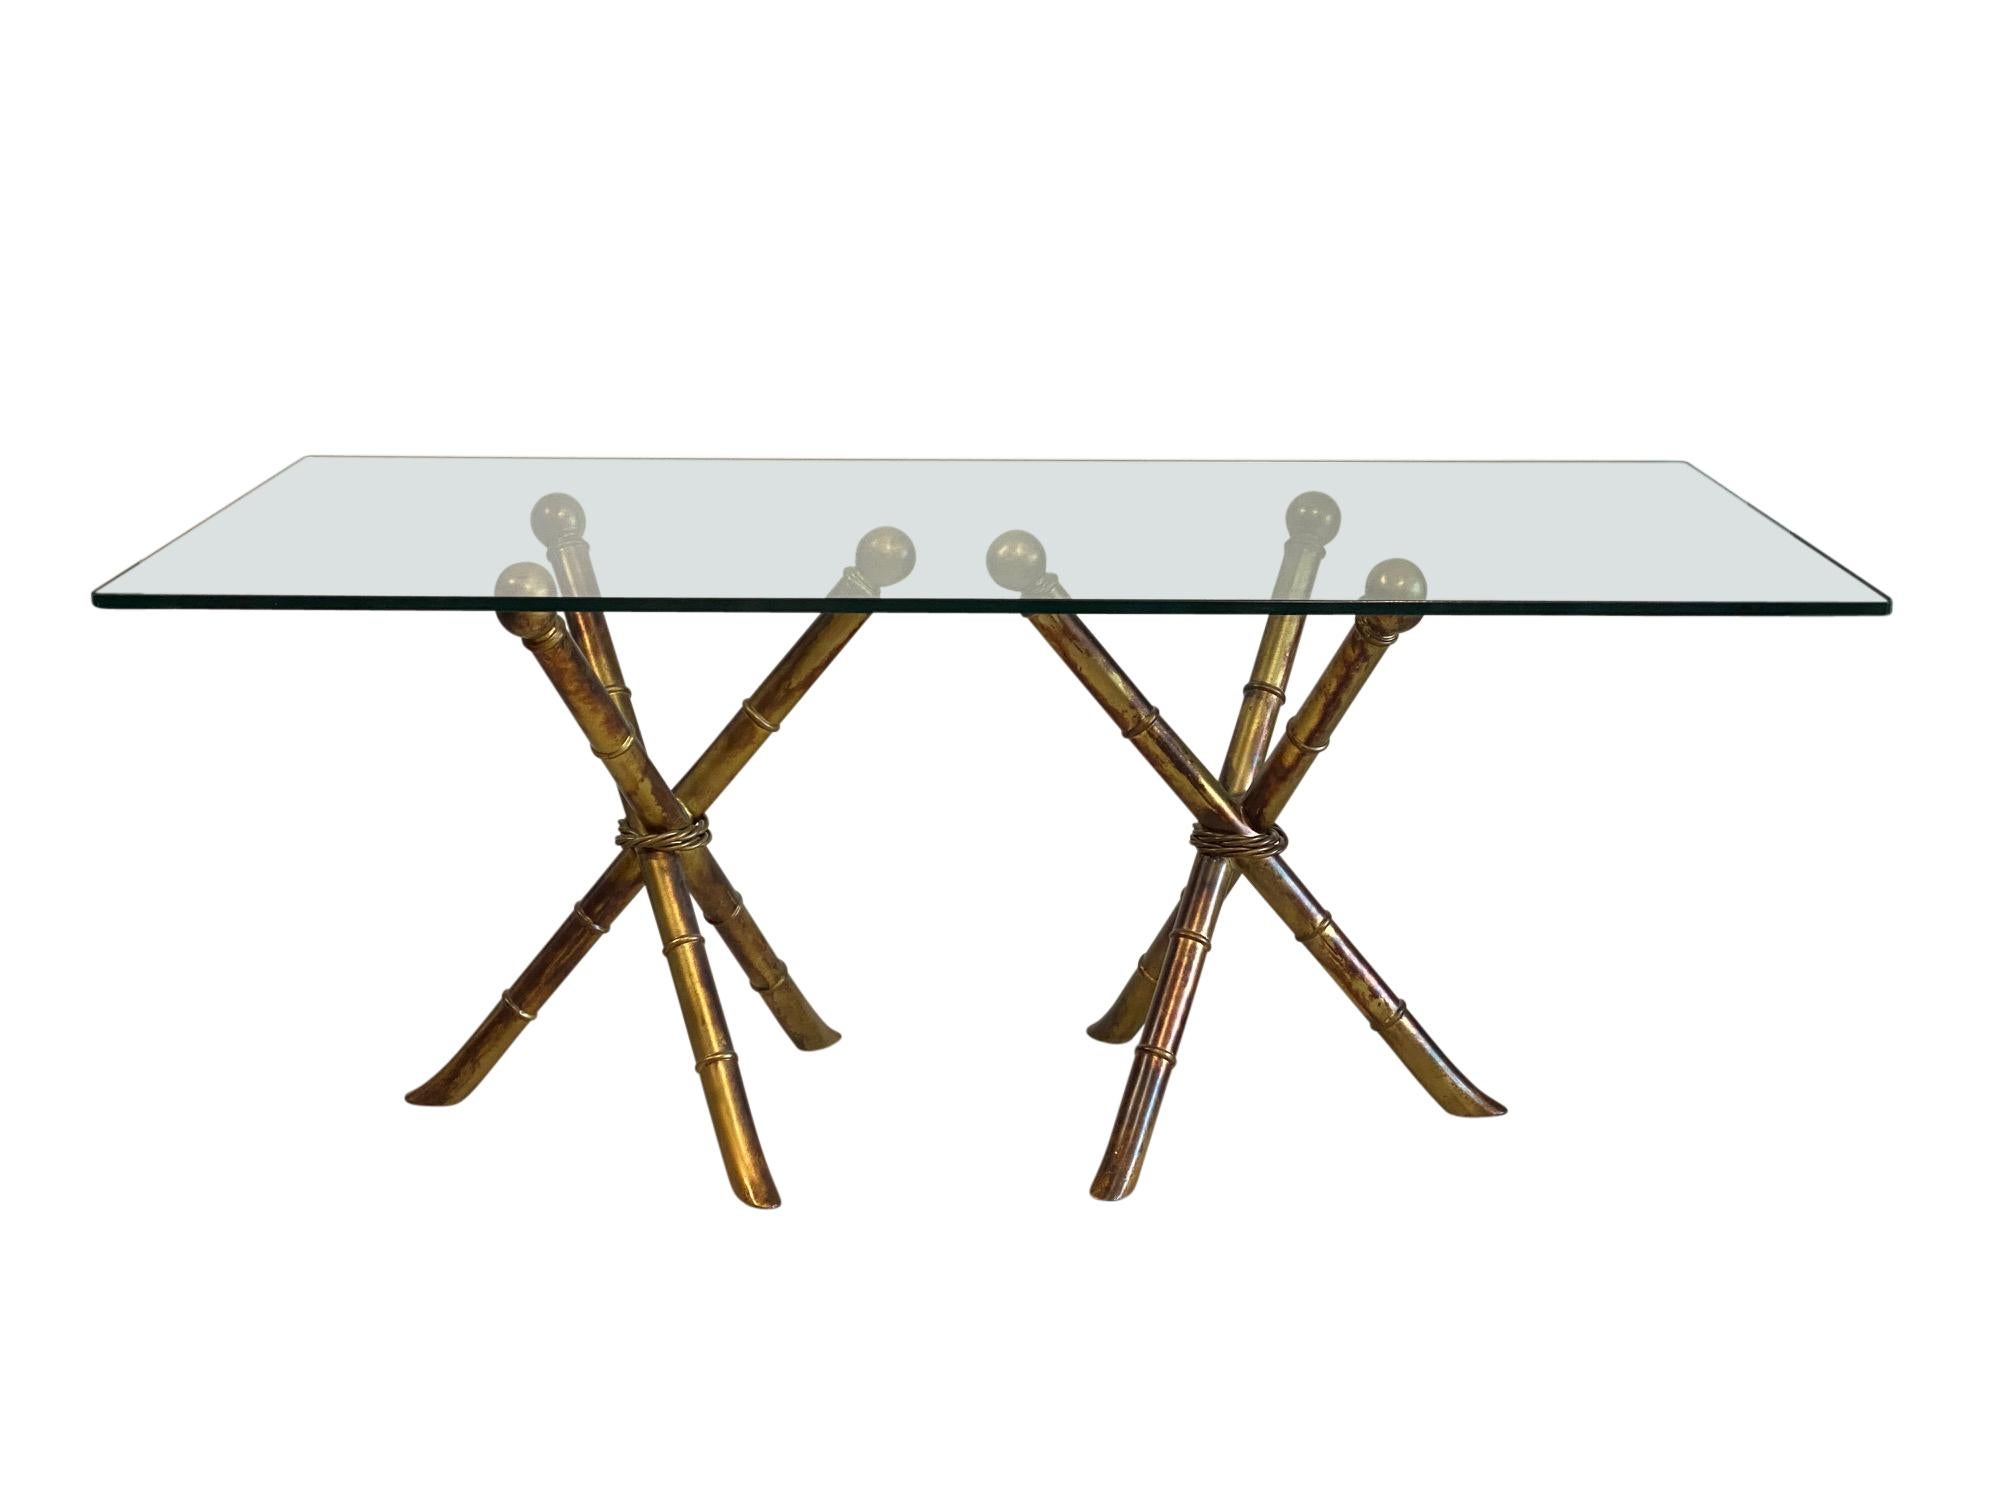 Faux bamboo painted metal dining table with glass top.